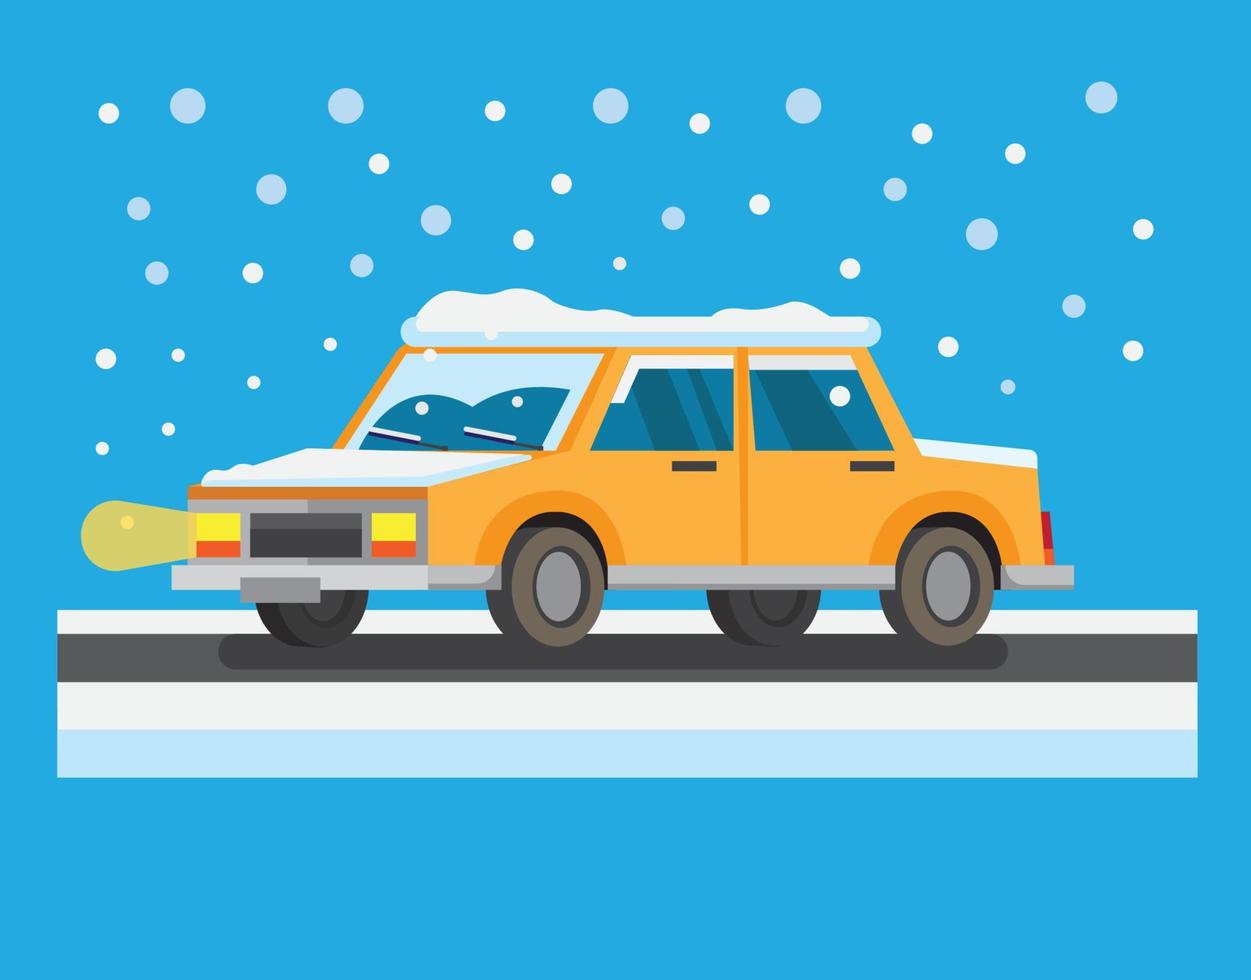 driving car in snow storm flat illustration vector